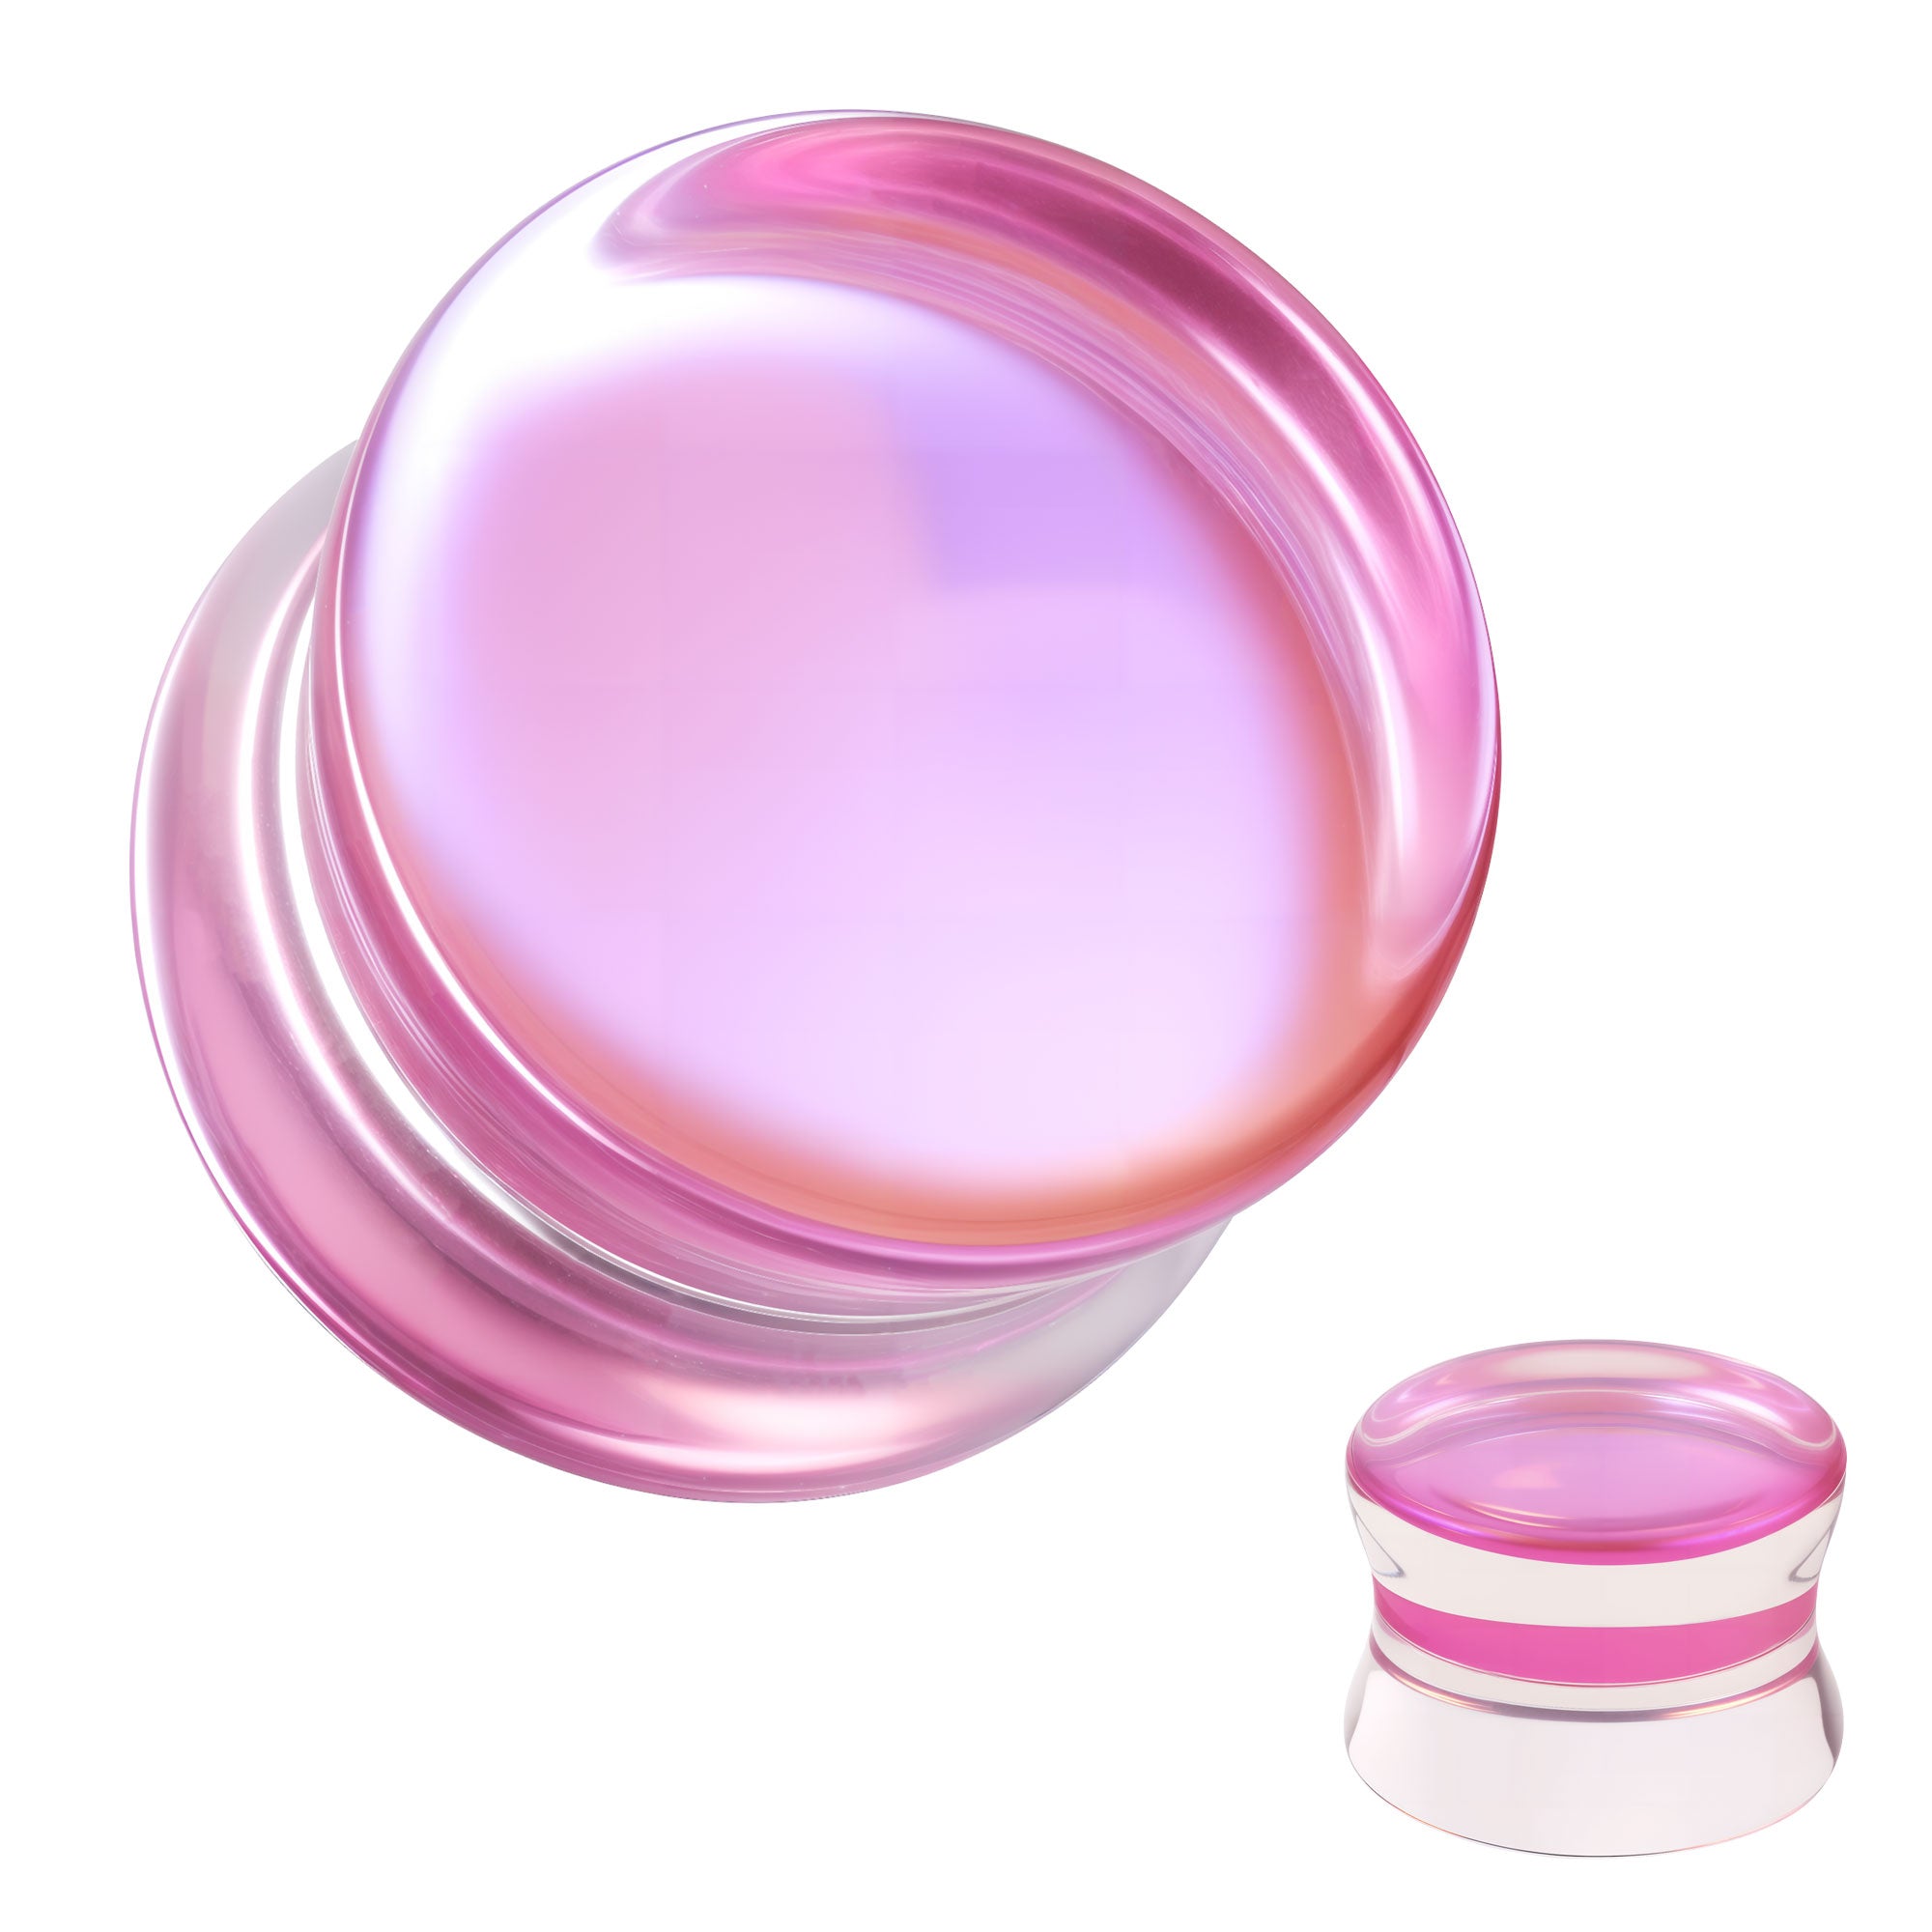 1 Pair 6-14mm Ear Plug Tunnel Pink Glass Ear Expanders Double Flare Ear Gauges